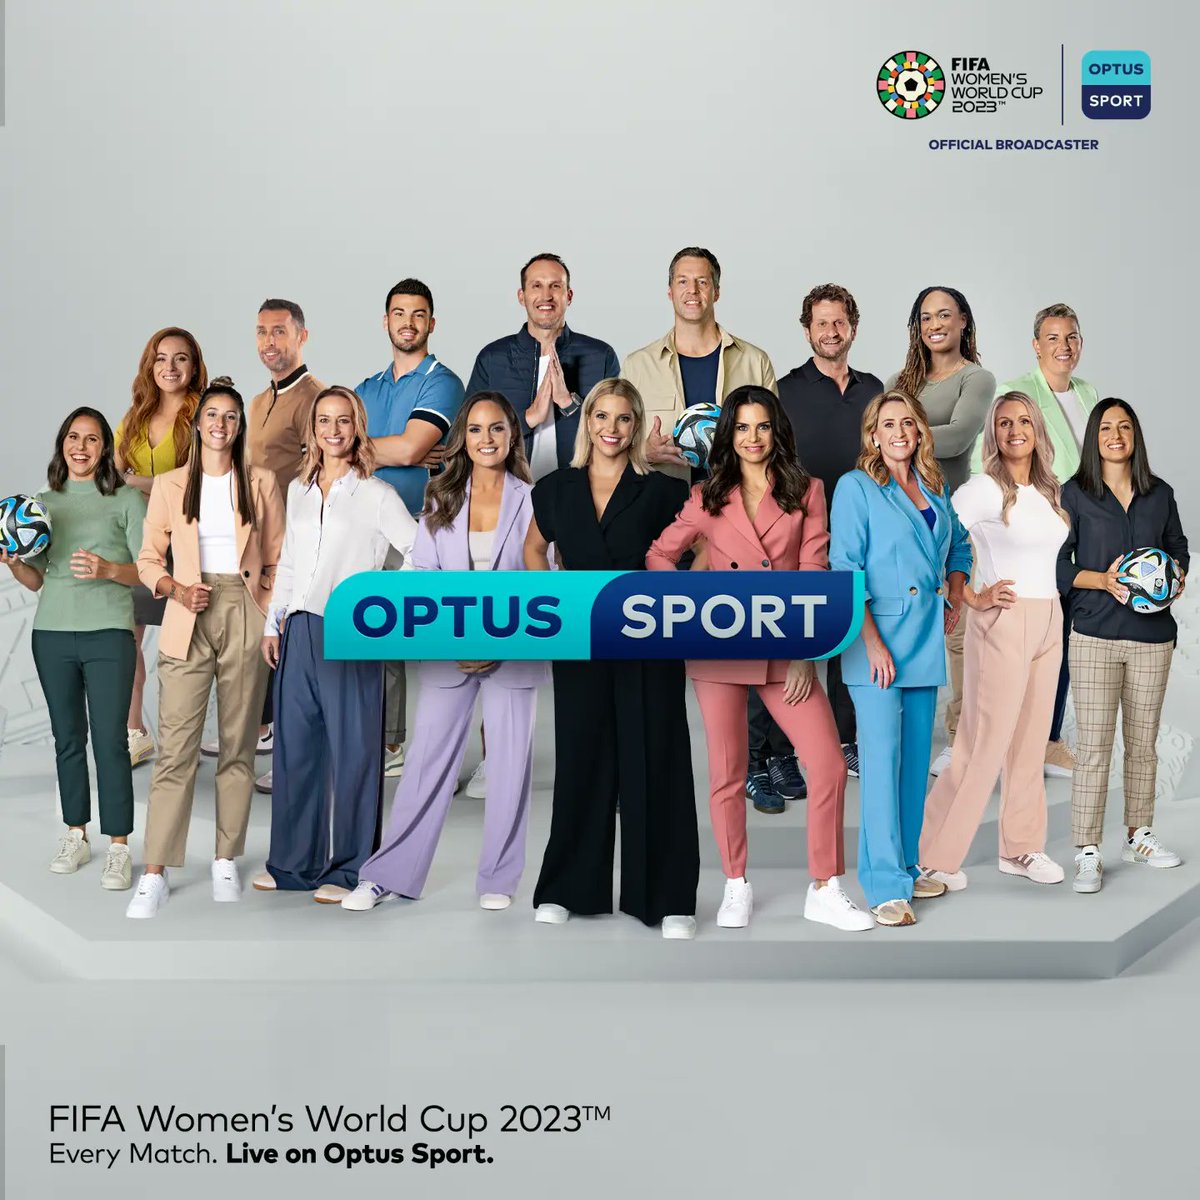 So excited to be joining the #optussport team for the coverage of the FIFA Women's World Cup 2023 😁⚽️ Find out more @OptusSport #FIFAWWC